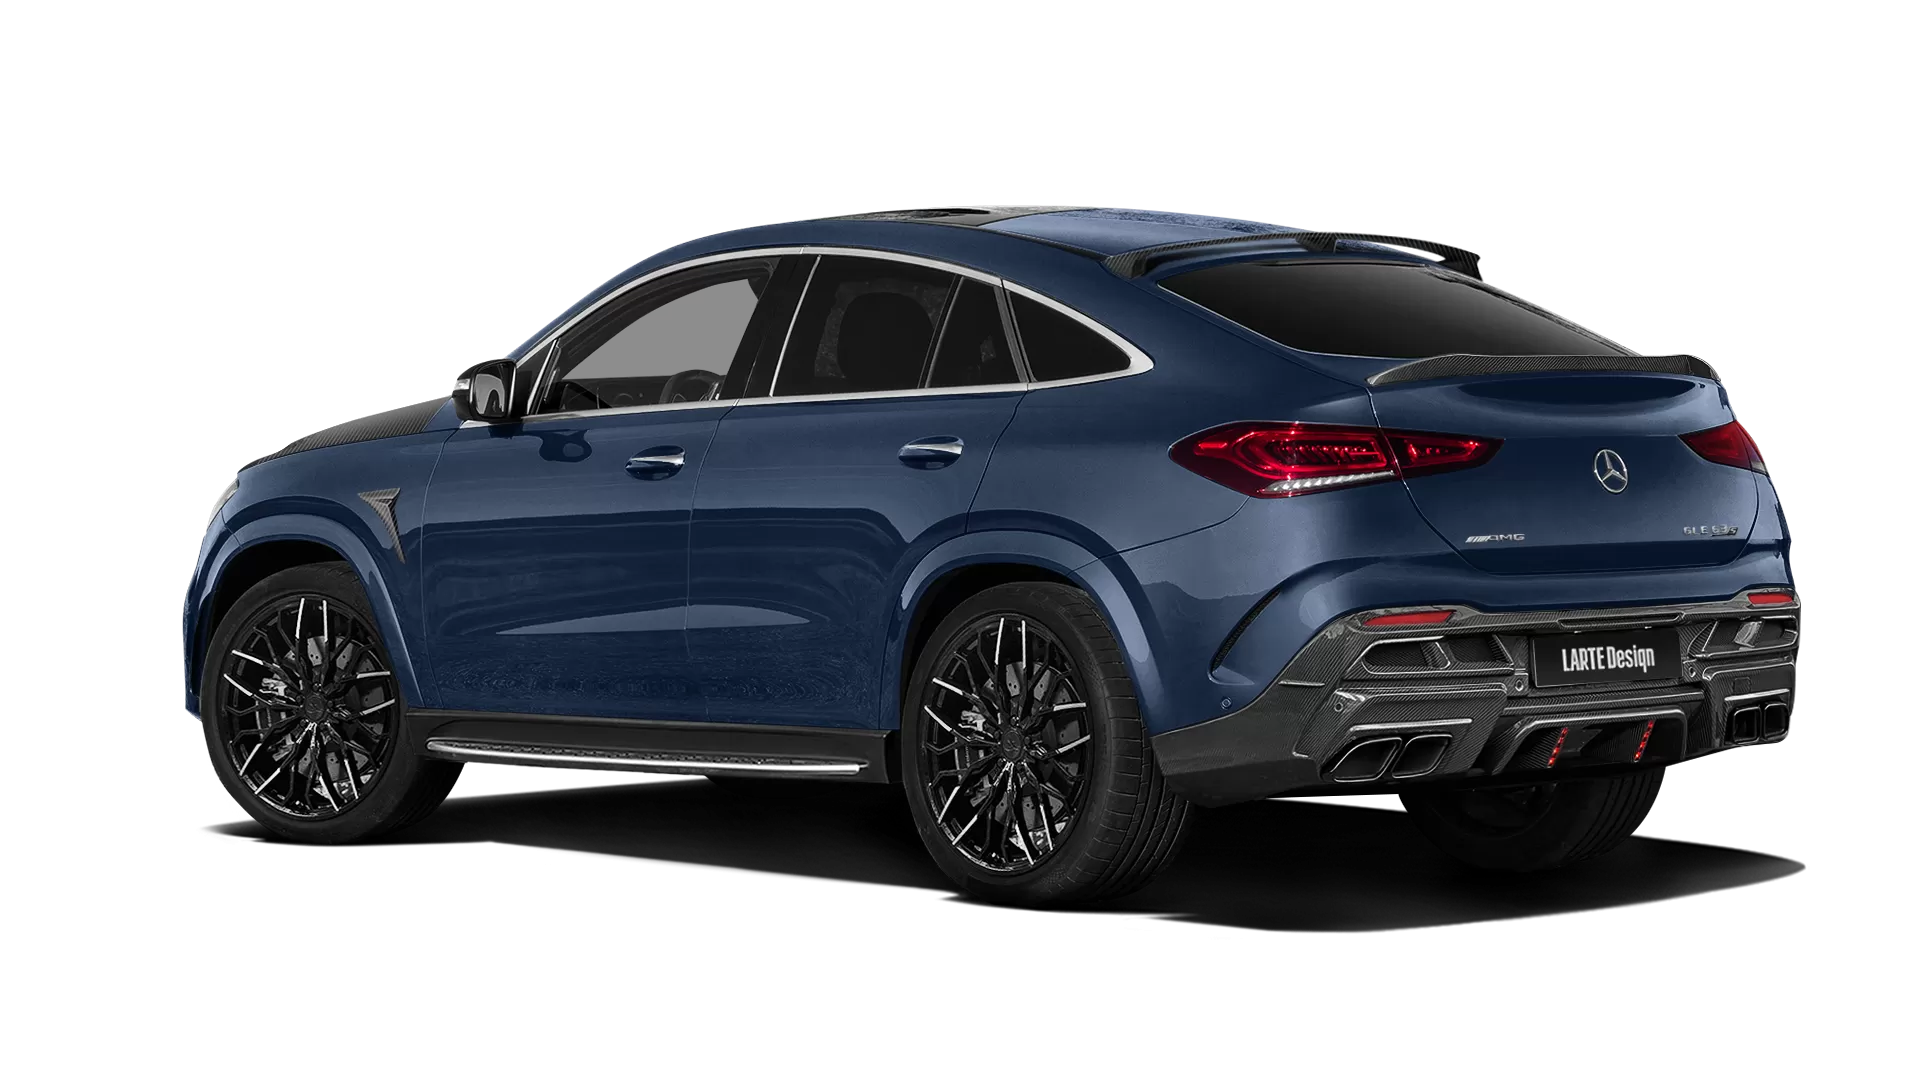 Mercedes GLE Coupe AMG 63 C167 with carbon body kit: back view shown in Cavansite Blue